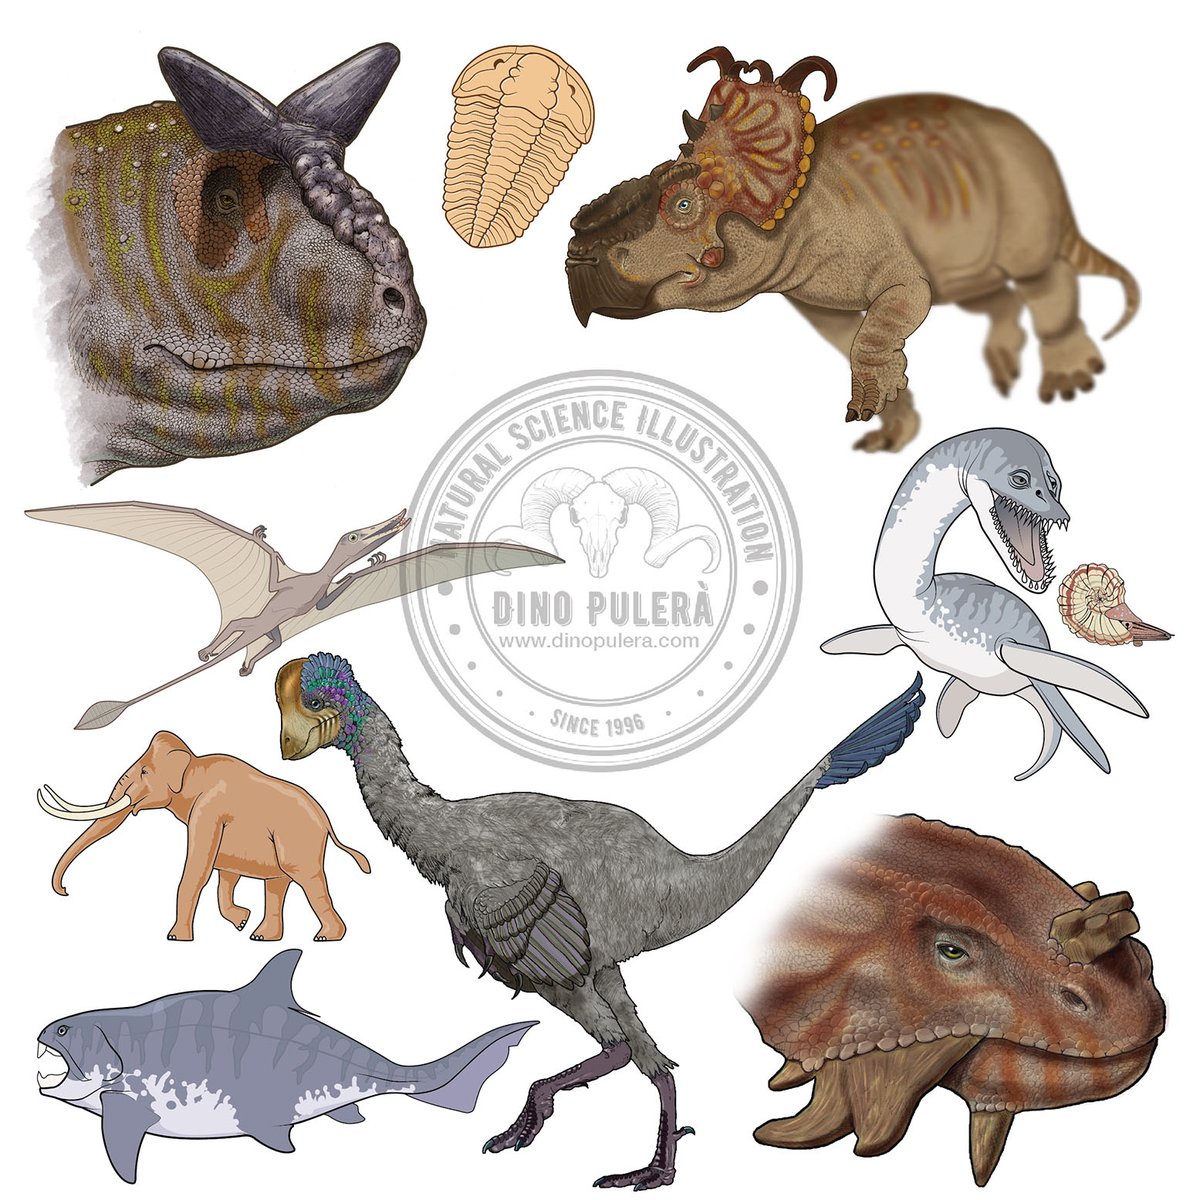 It's #FossilFriday and what better than a #PaleoArt theme for @GNSIorg #SciArtPortfolioWeek #SciArt #dinosaur #paleontology #VizSciComm